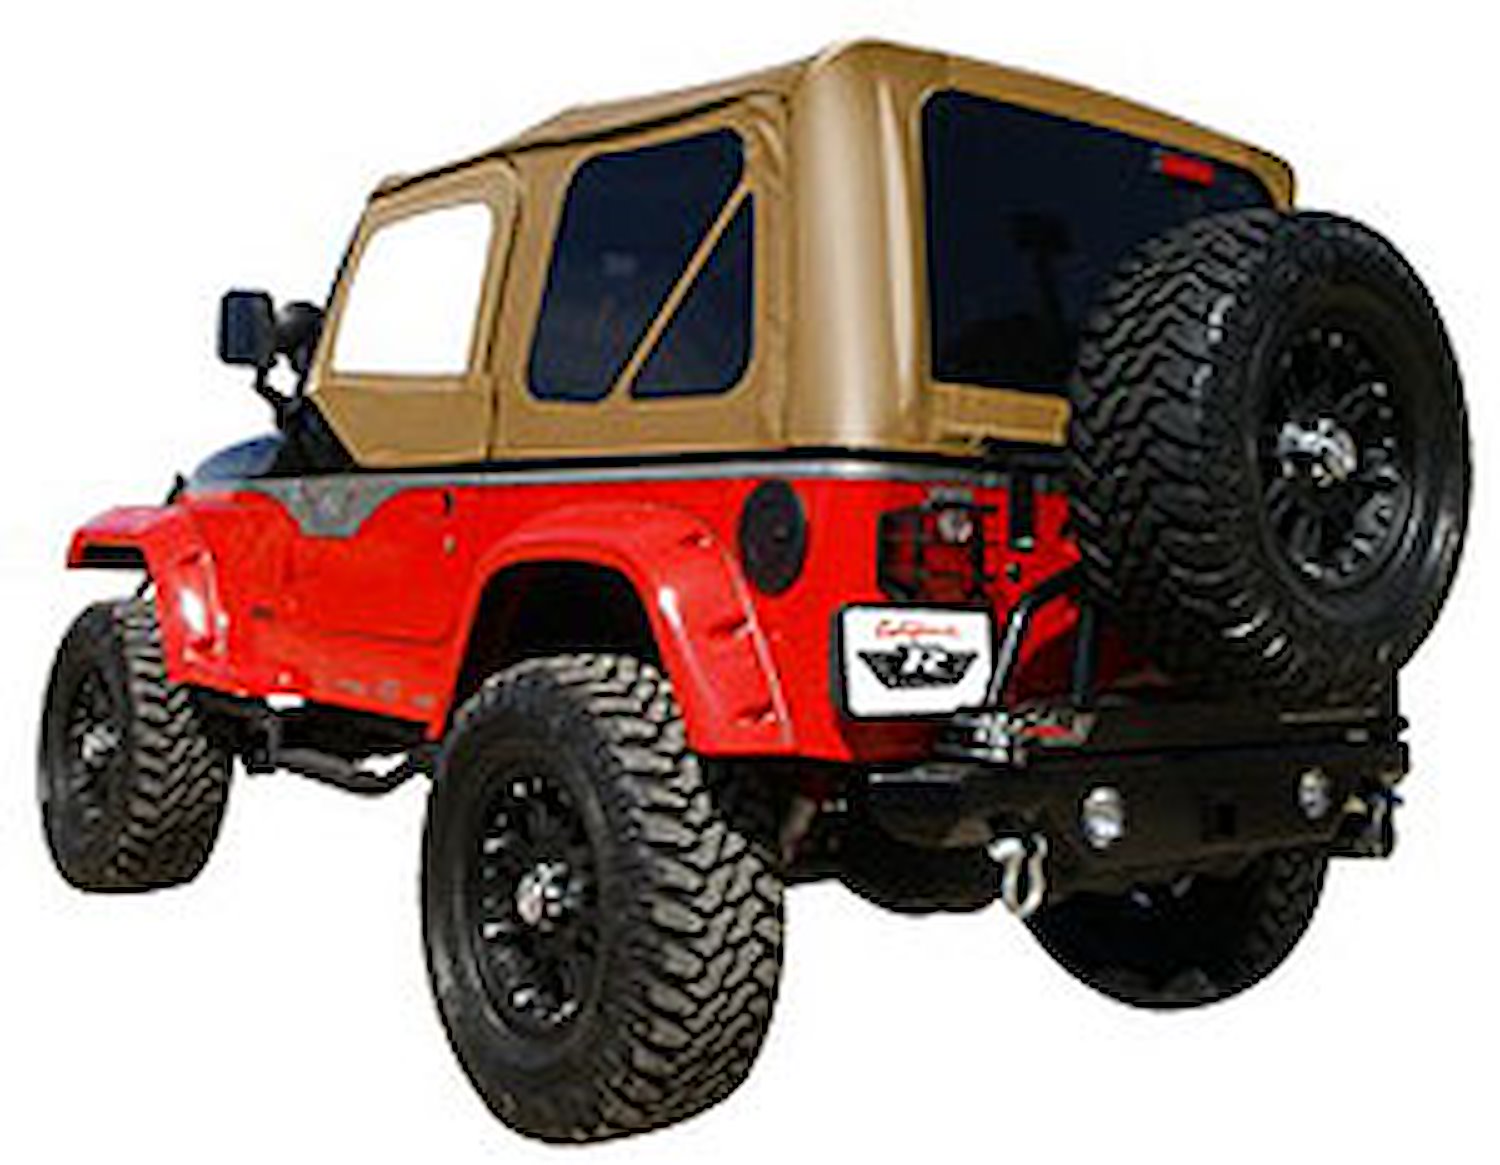 REPLACEMENT PLUS TOP JEEP WRANGLER 97-06 SPICE